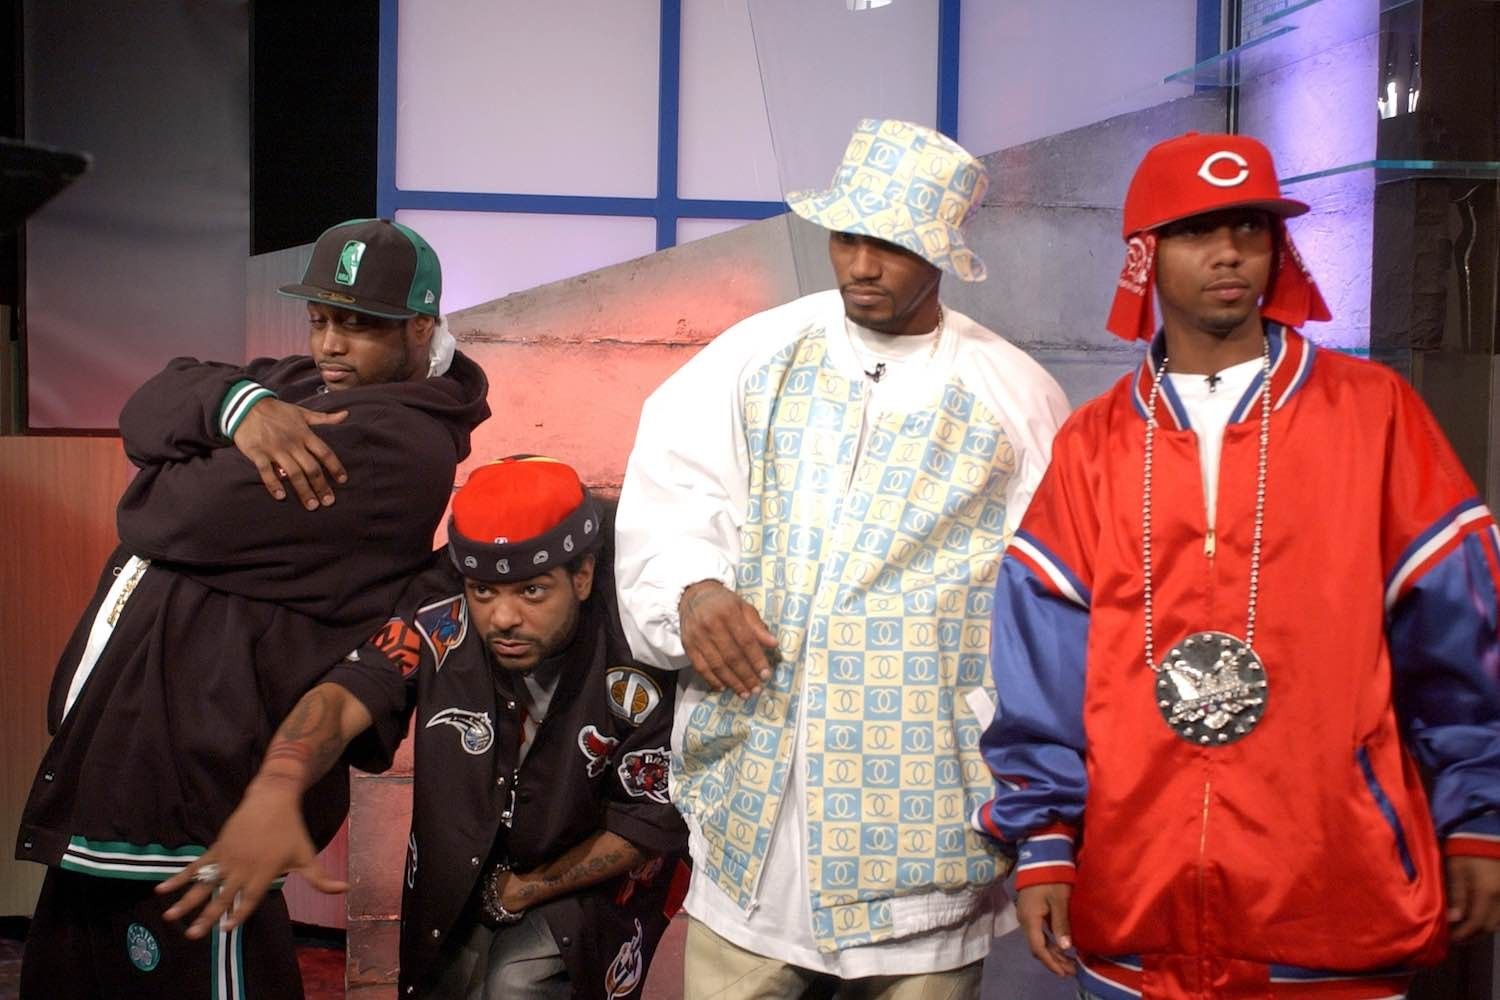 Cam'ron: Clothes, Outfits, Brands, Style and Looks